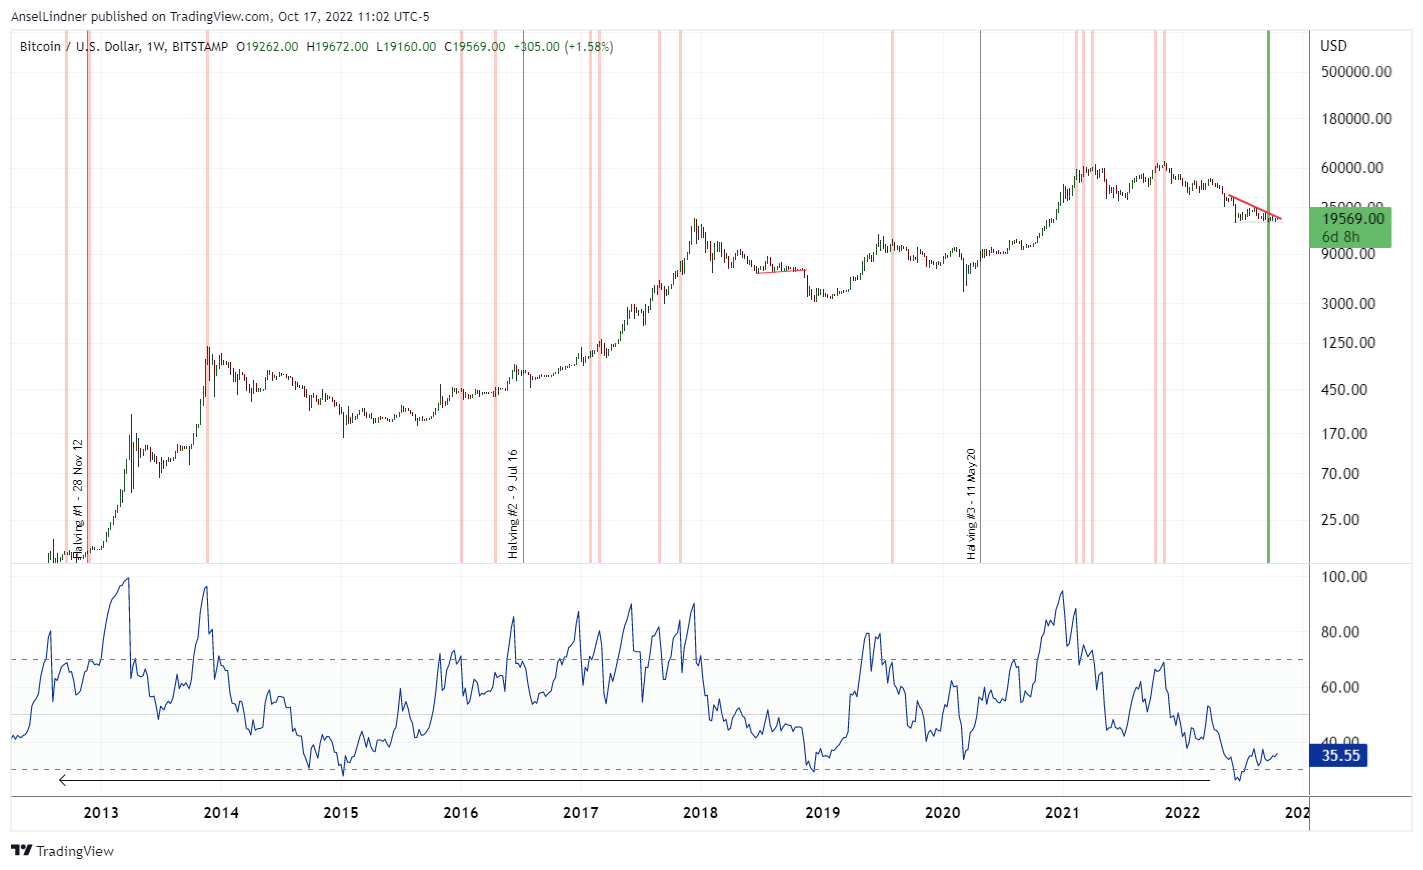 Bitcoin weekly most oversold ever, with bullish divergence